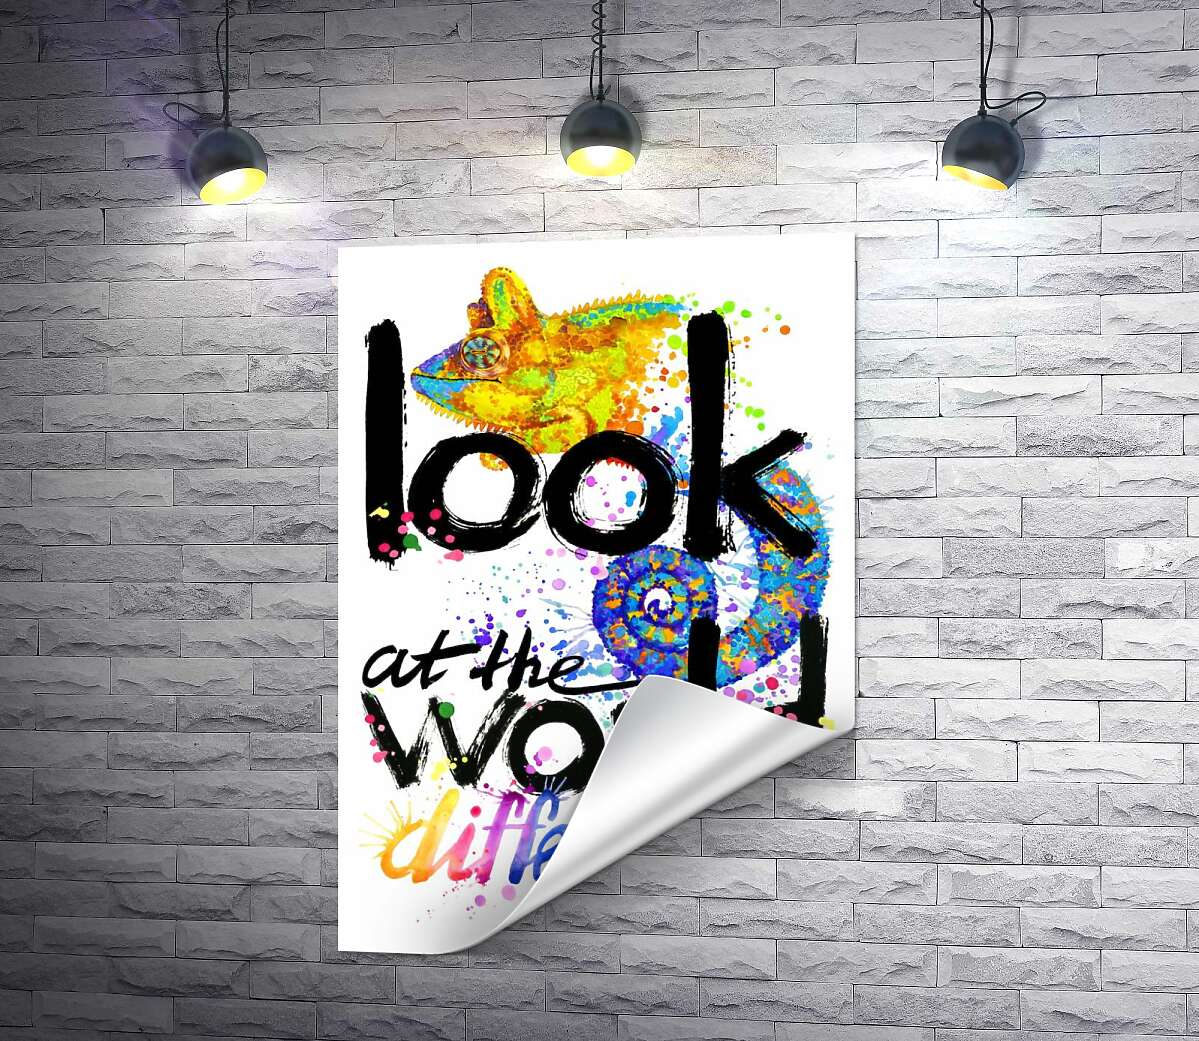 друк Напис "look at the world differently" з силуетом хамелеона